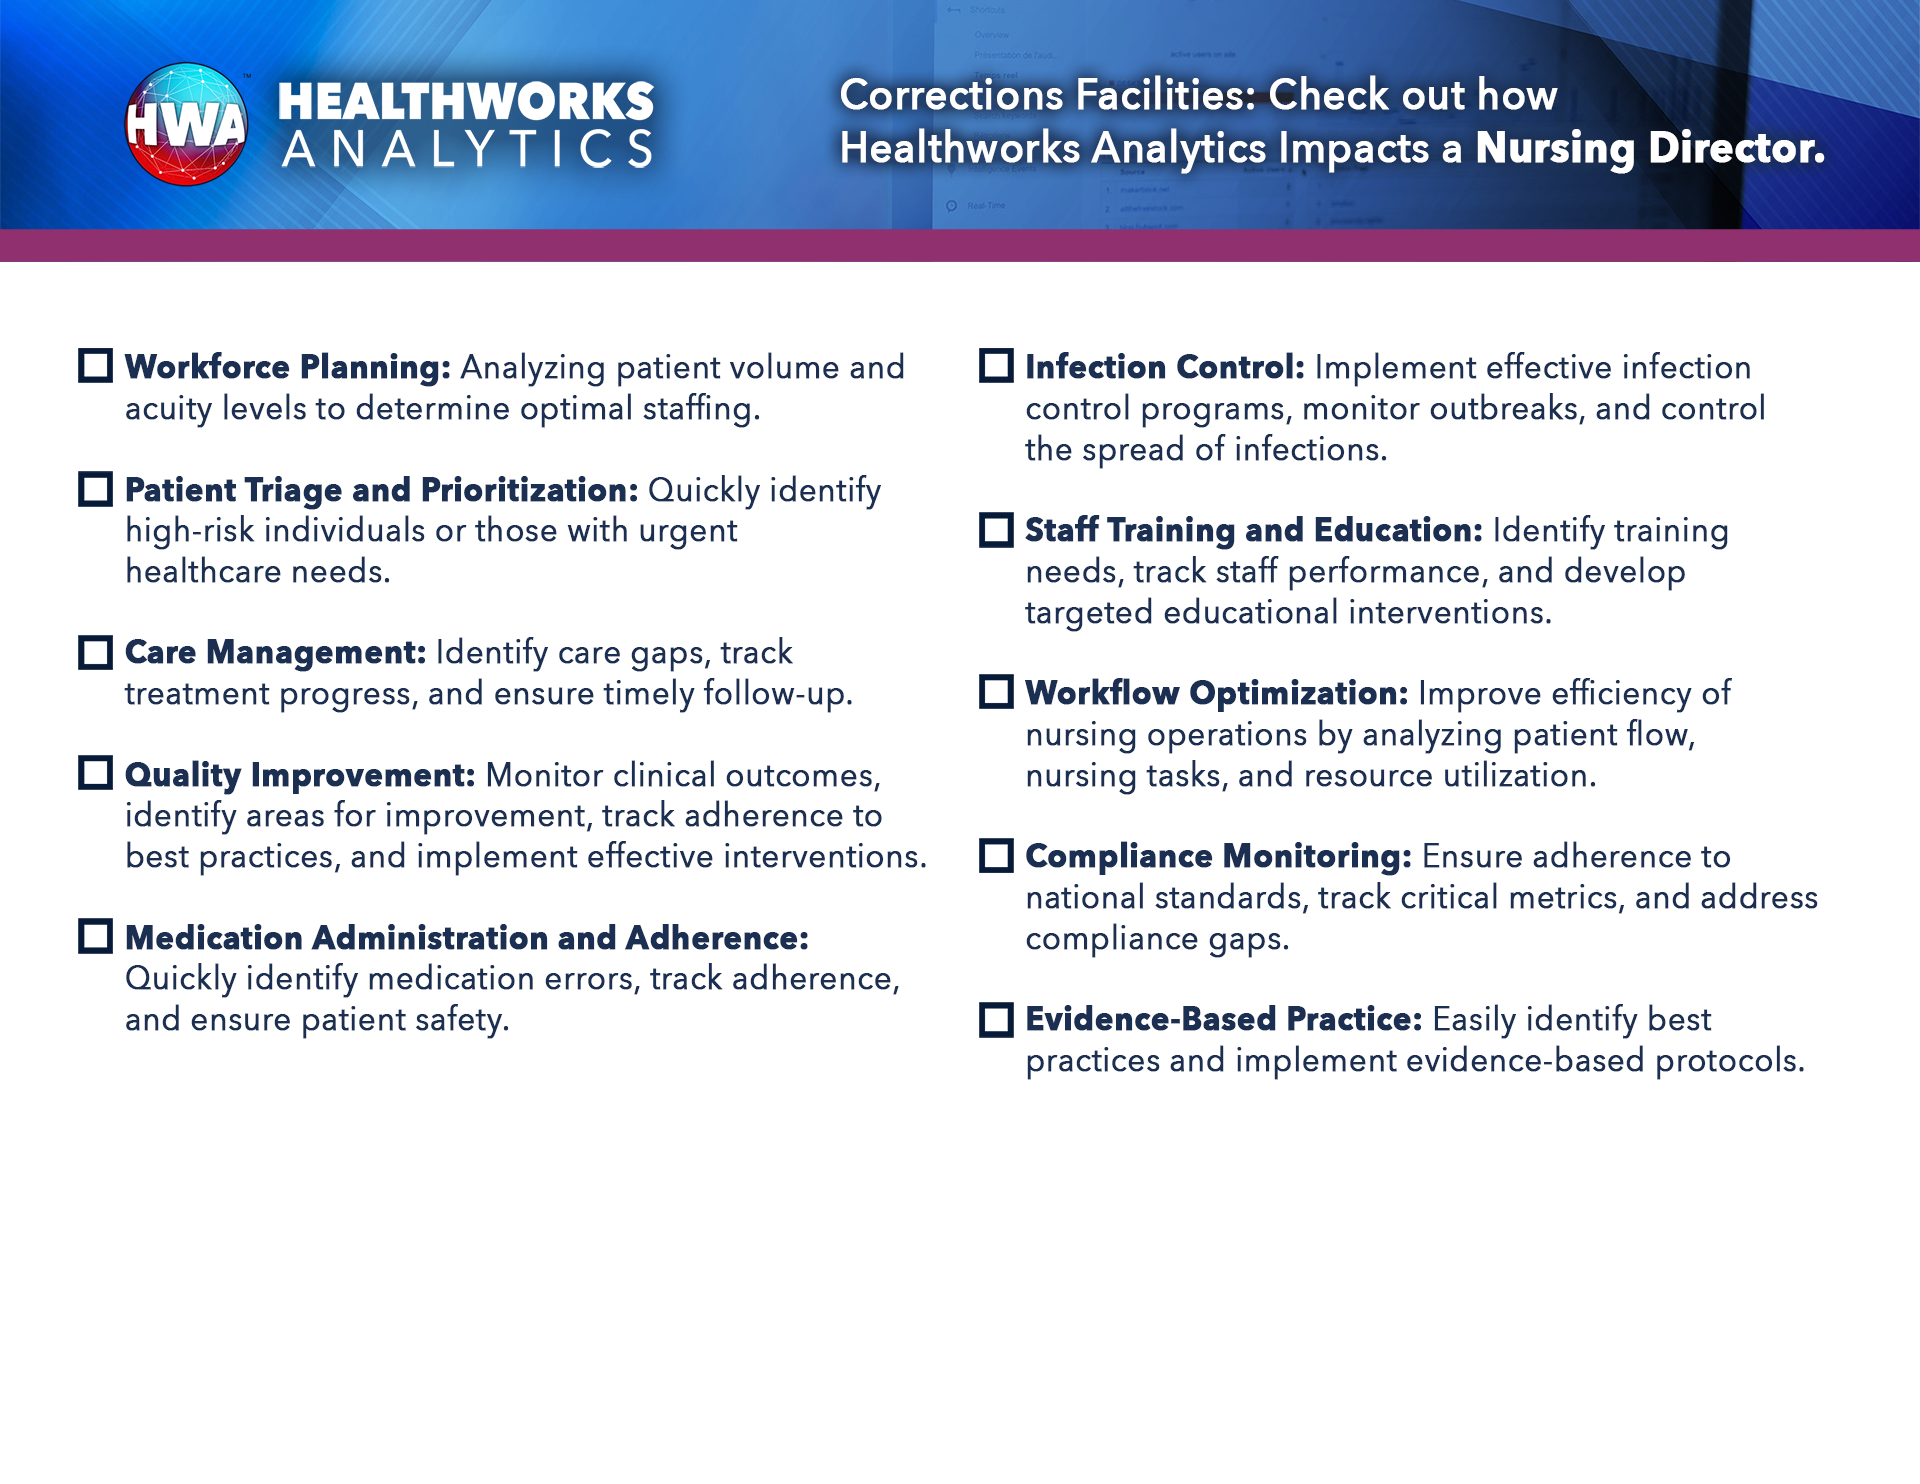 Corrections-Facilities---Check-out-how-Healthworks-Analytics-Impacts-a-Nursing-Director-back